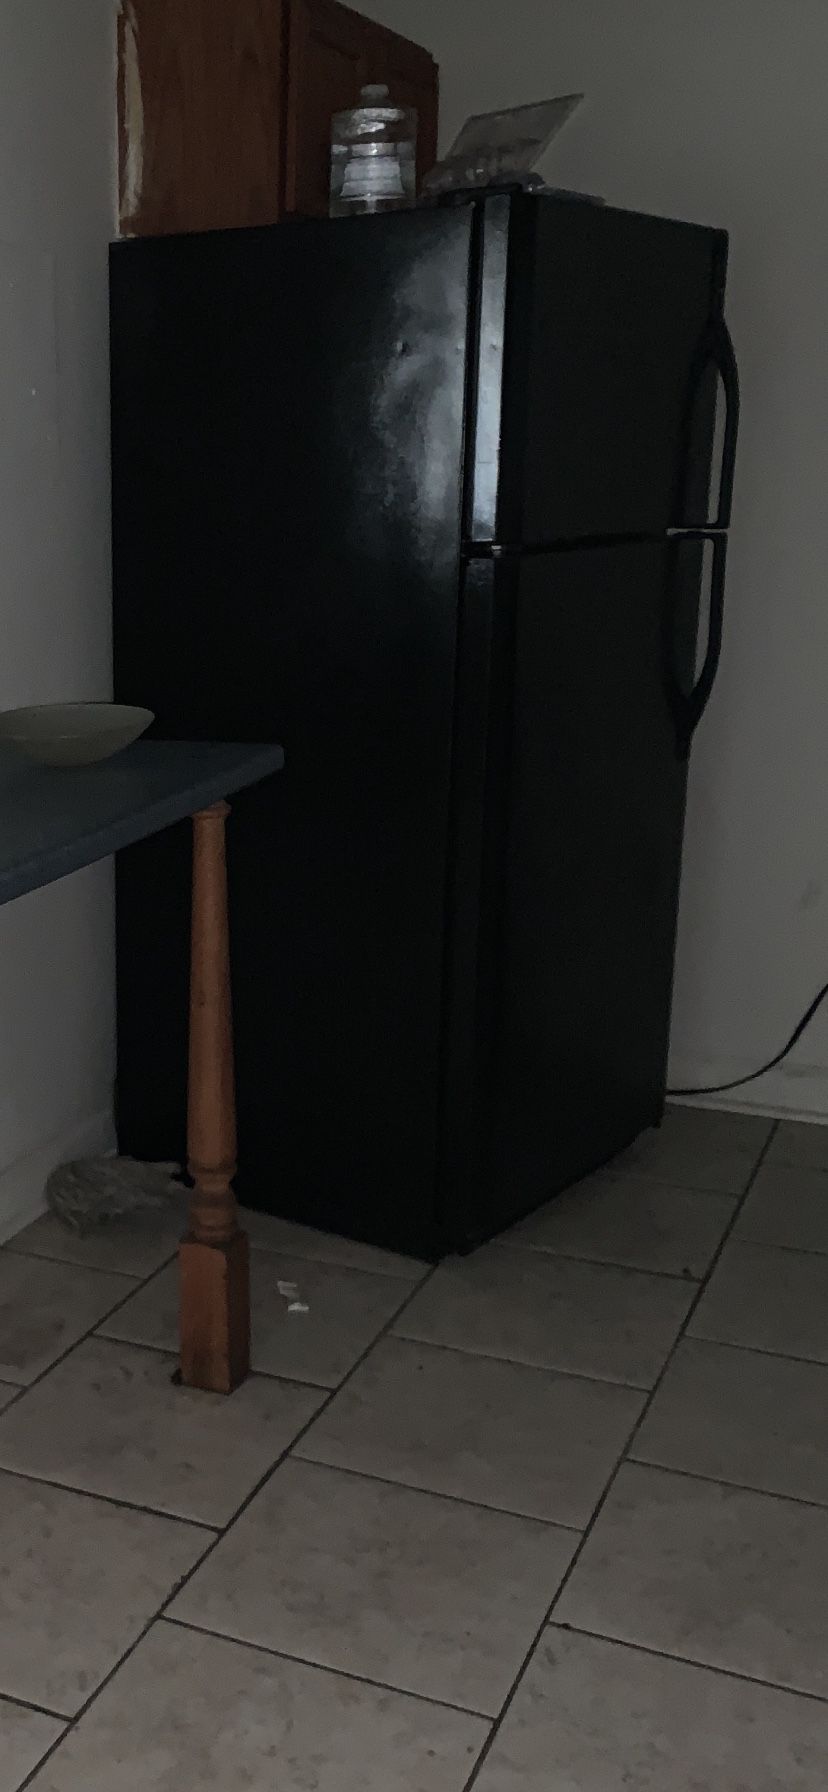 Refrigerator and gas stove